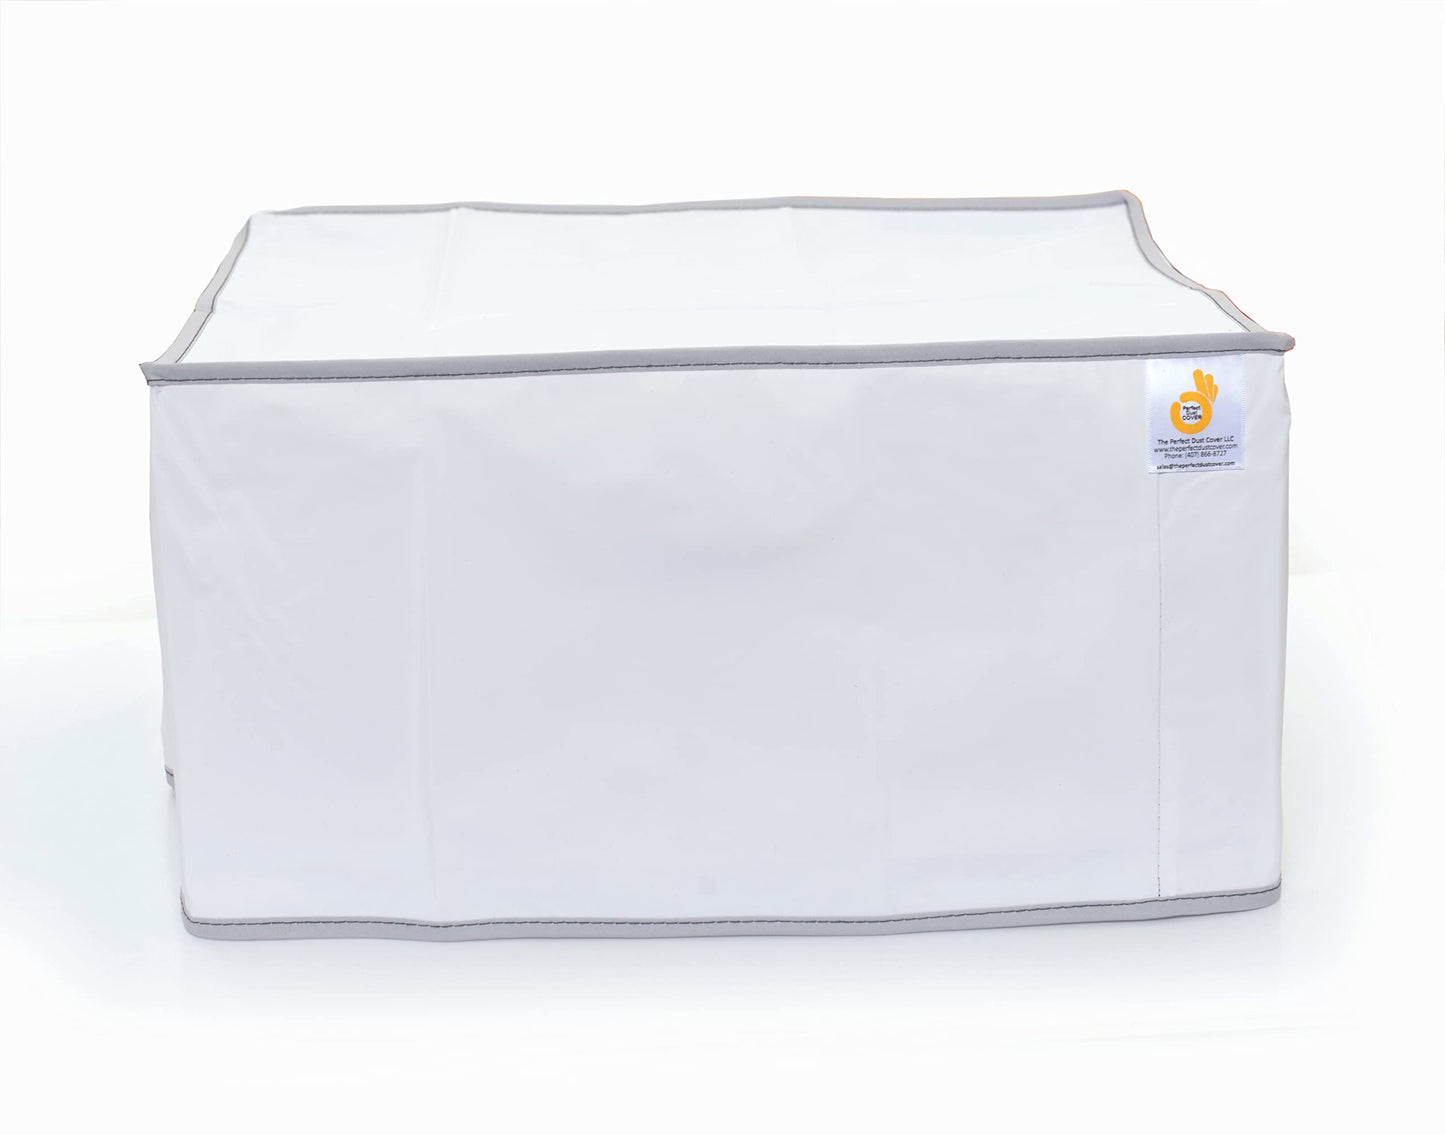 The Perfect Dust Cover, White Nylon Cover Compatible with Canon Color imageCLASS LPB612Cdw Laser Printer, Anti Static and Waterproof Dust Cover by The Perfect Dust Cover LLC